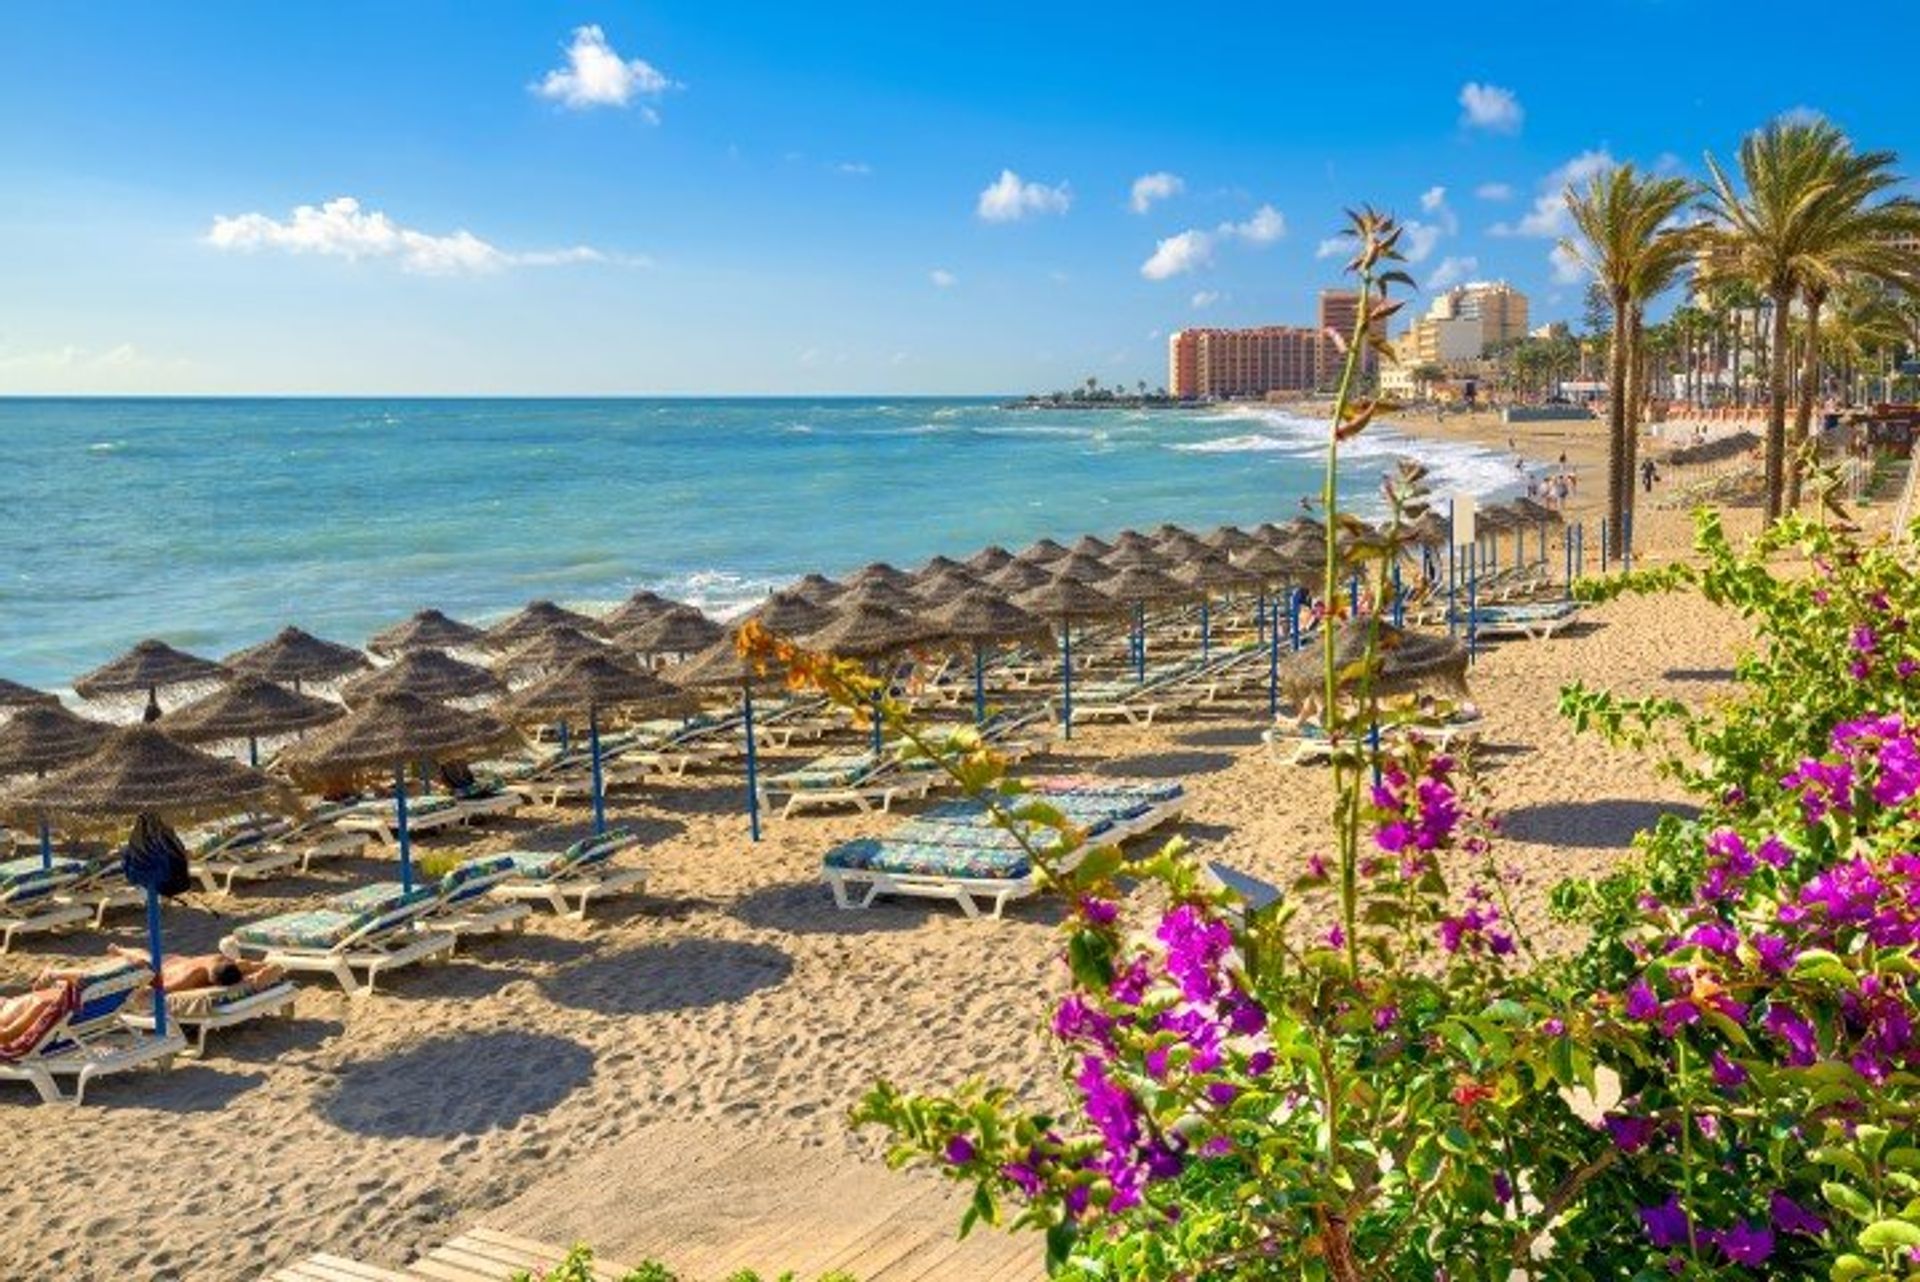 The Costa del Sol is the most popular of all the costas in Spain, attracting over 12 million visitors each year